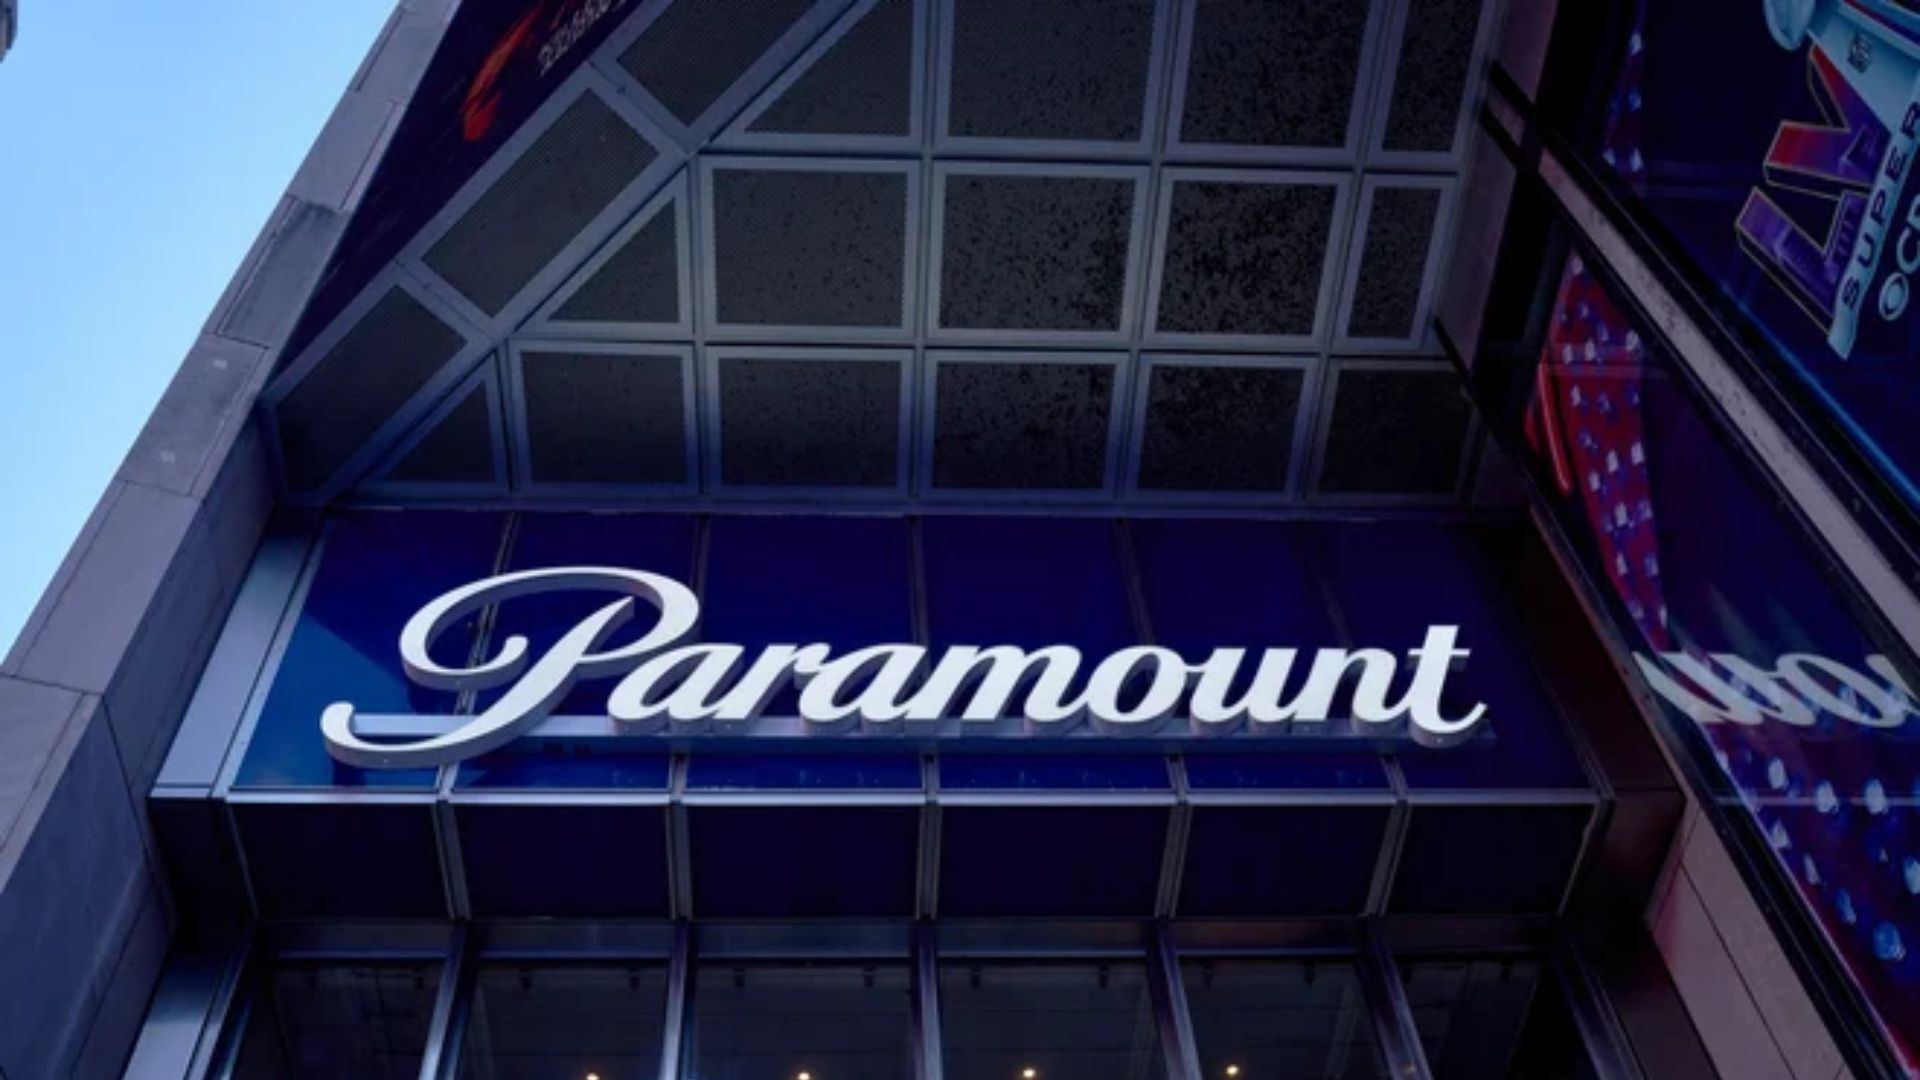 Paramount’s new self-serve ad platform aims to bring smaller marketers to tv